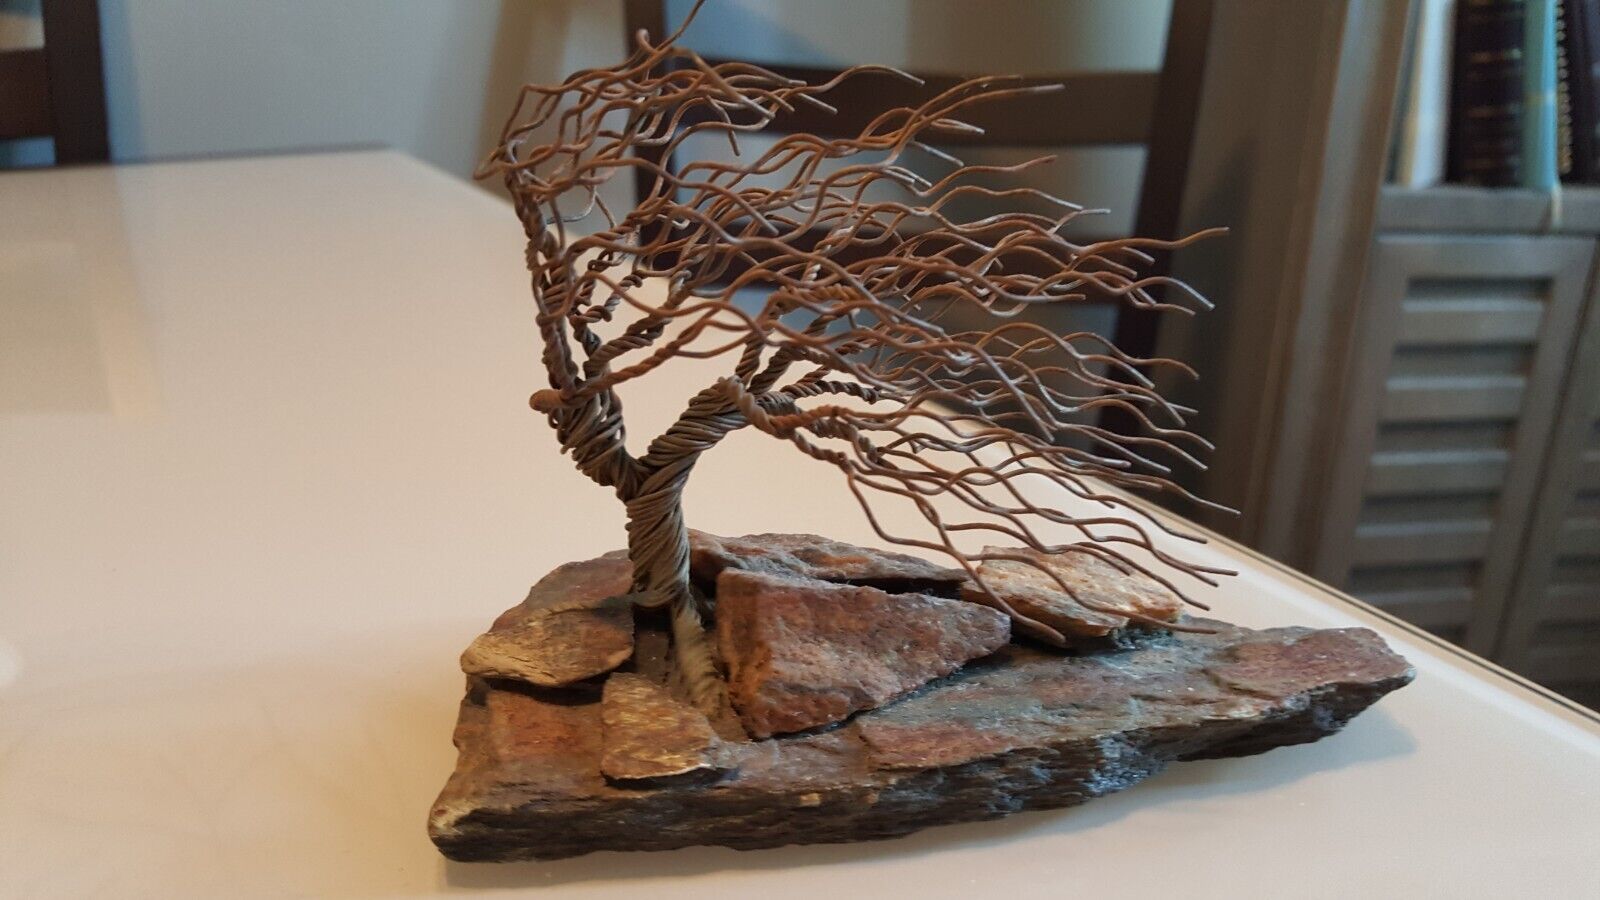 VINTAGE ASIAN WIRE ART BONSAI TREE mounted on stone SCULPTURE signed